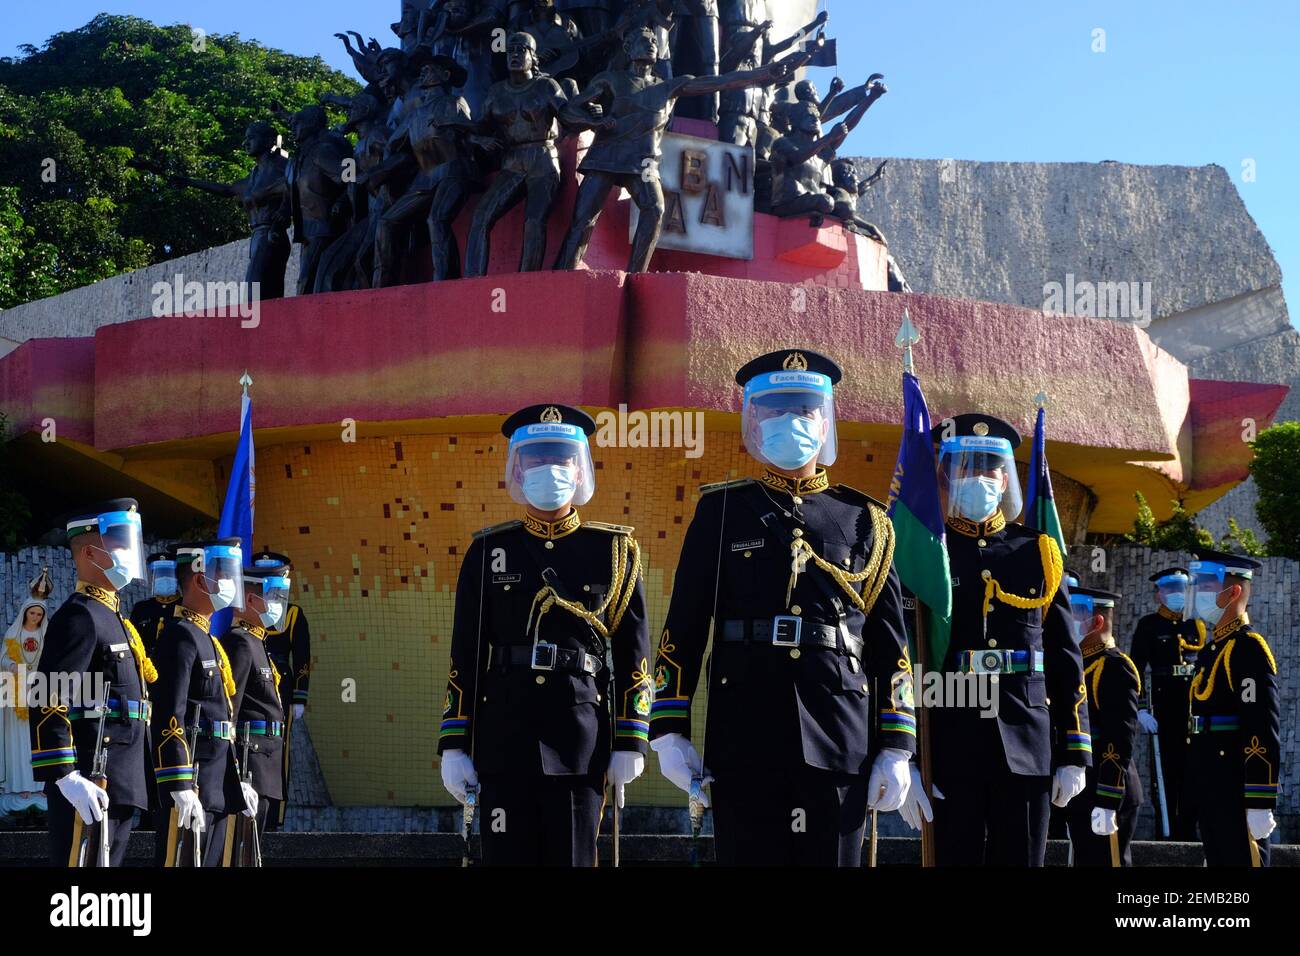 Manila, Philippines. 25th Feb, 2021. Military personnel wear masks and face shields as they commemorate the 35th anniversary of EDSA Revolution in front of the People Power Monument. This year's theme is 'EDSA 2021: Kapayapaan, Paghilom, Pagbangon (Peace, Healing, Recovery), to reflect on the national efforts in the face of COVID-19 pandemic. Credit: Majority World CIC/Alamy Live News Stock Photo